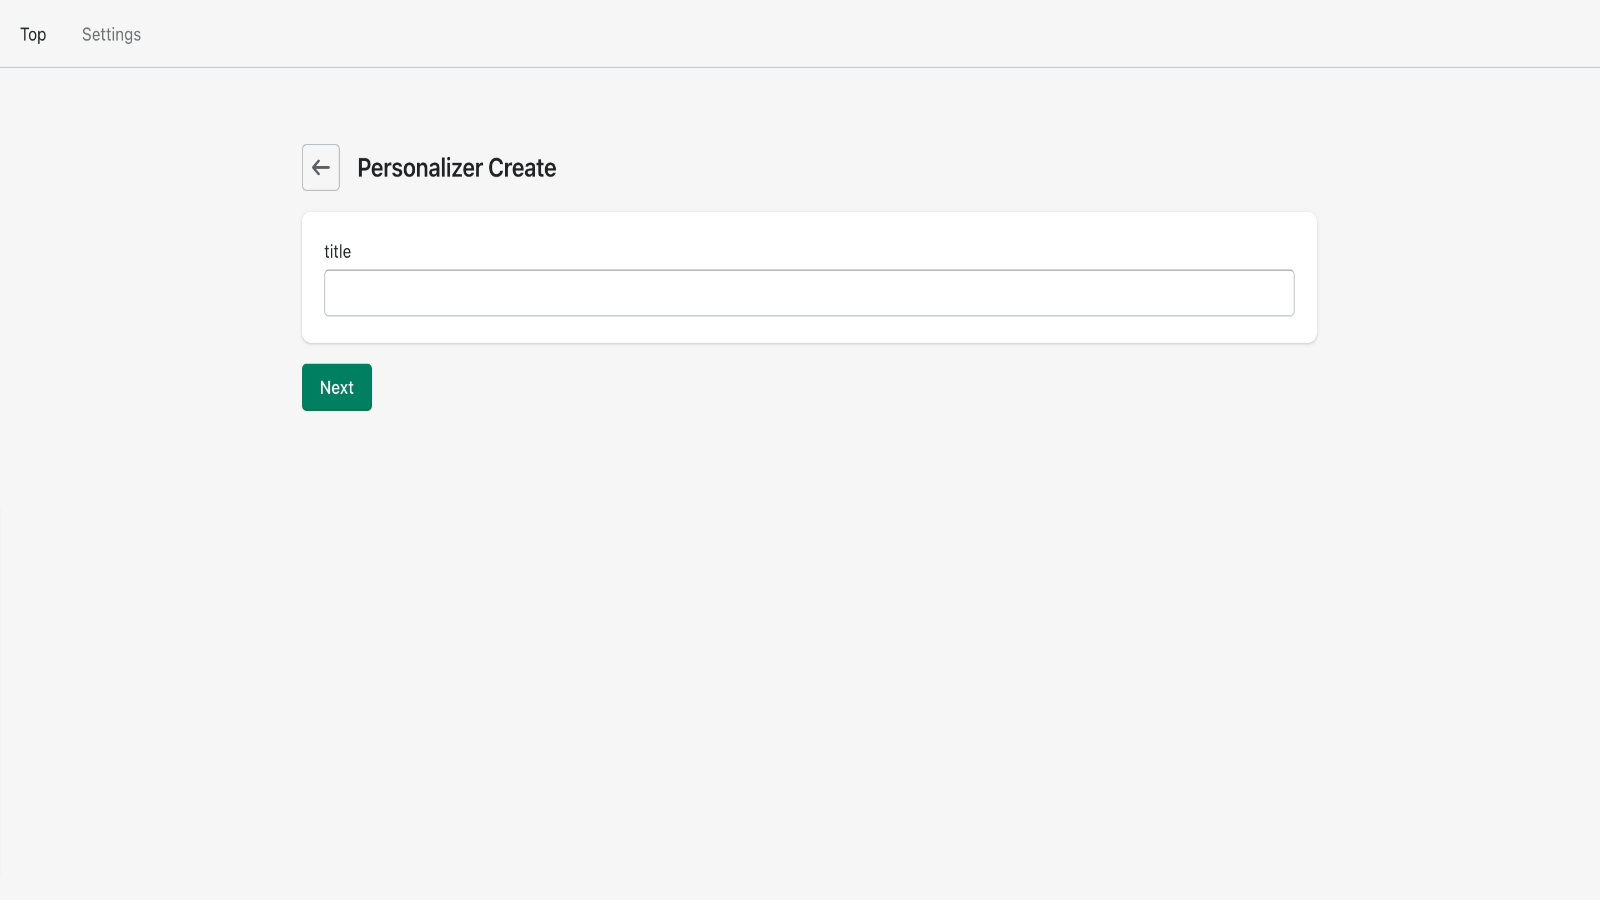 Create a personalizer with title first